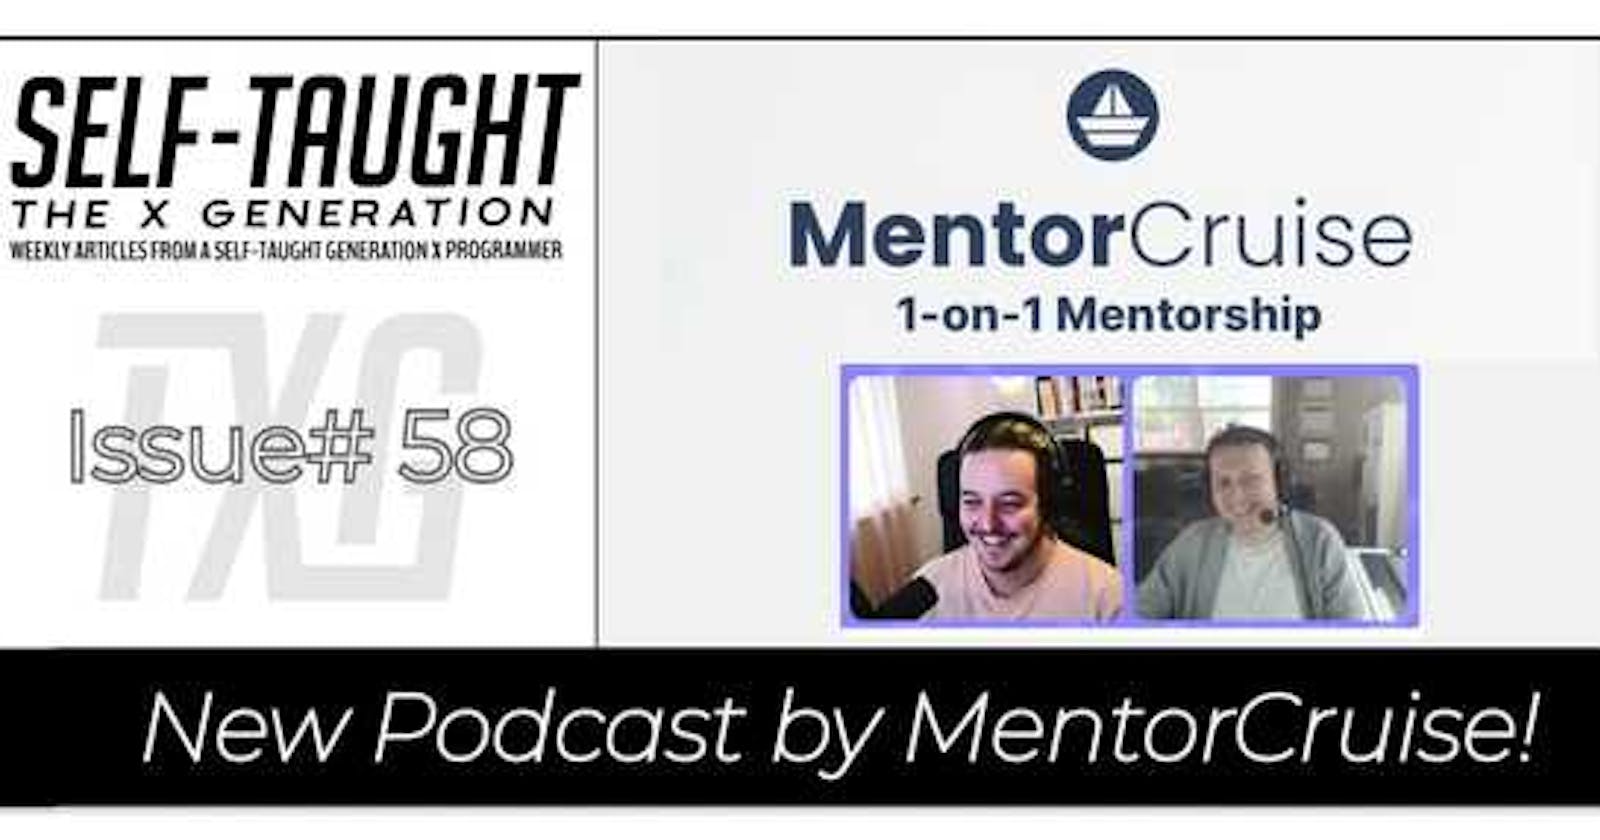 The MentorCruise Podcast